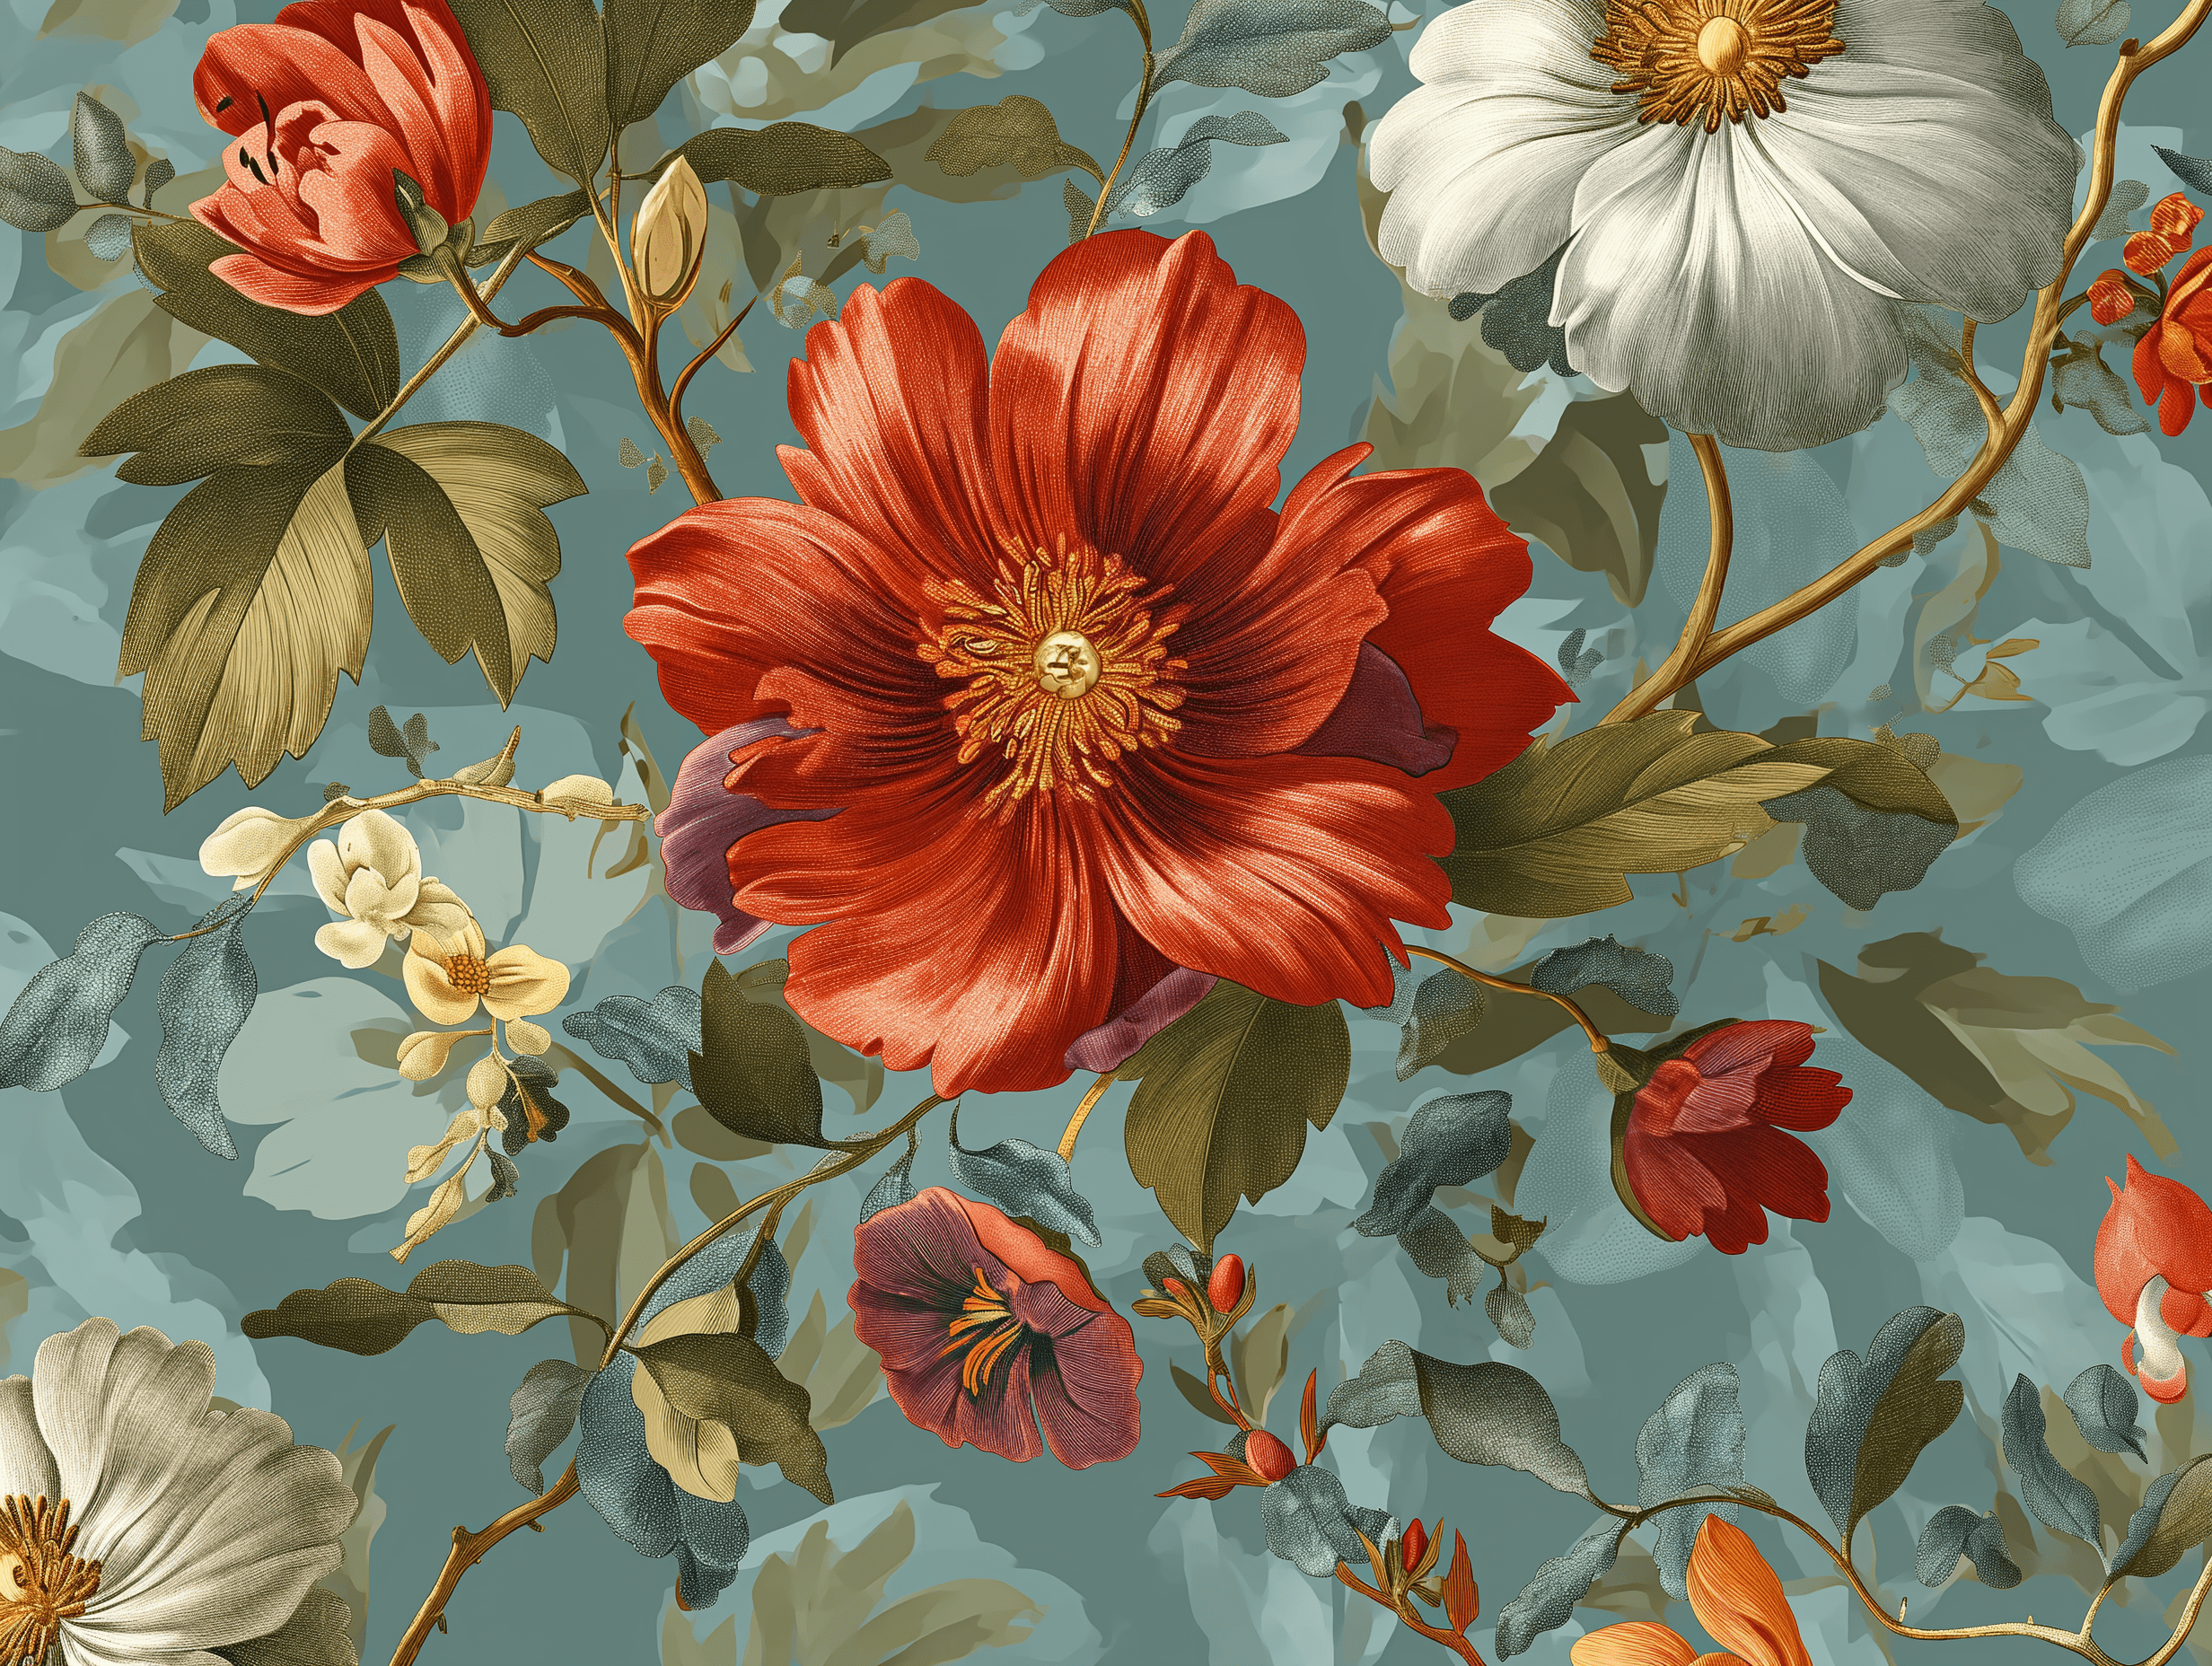 A pattern design inspired by Redouté's illustrations, showcasing the intricate flower details